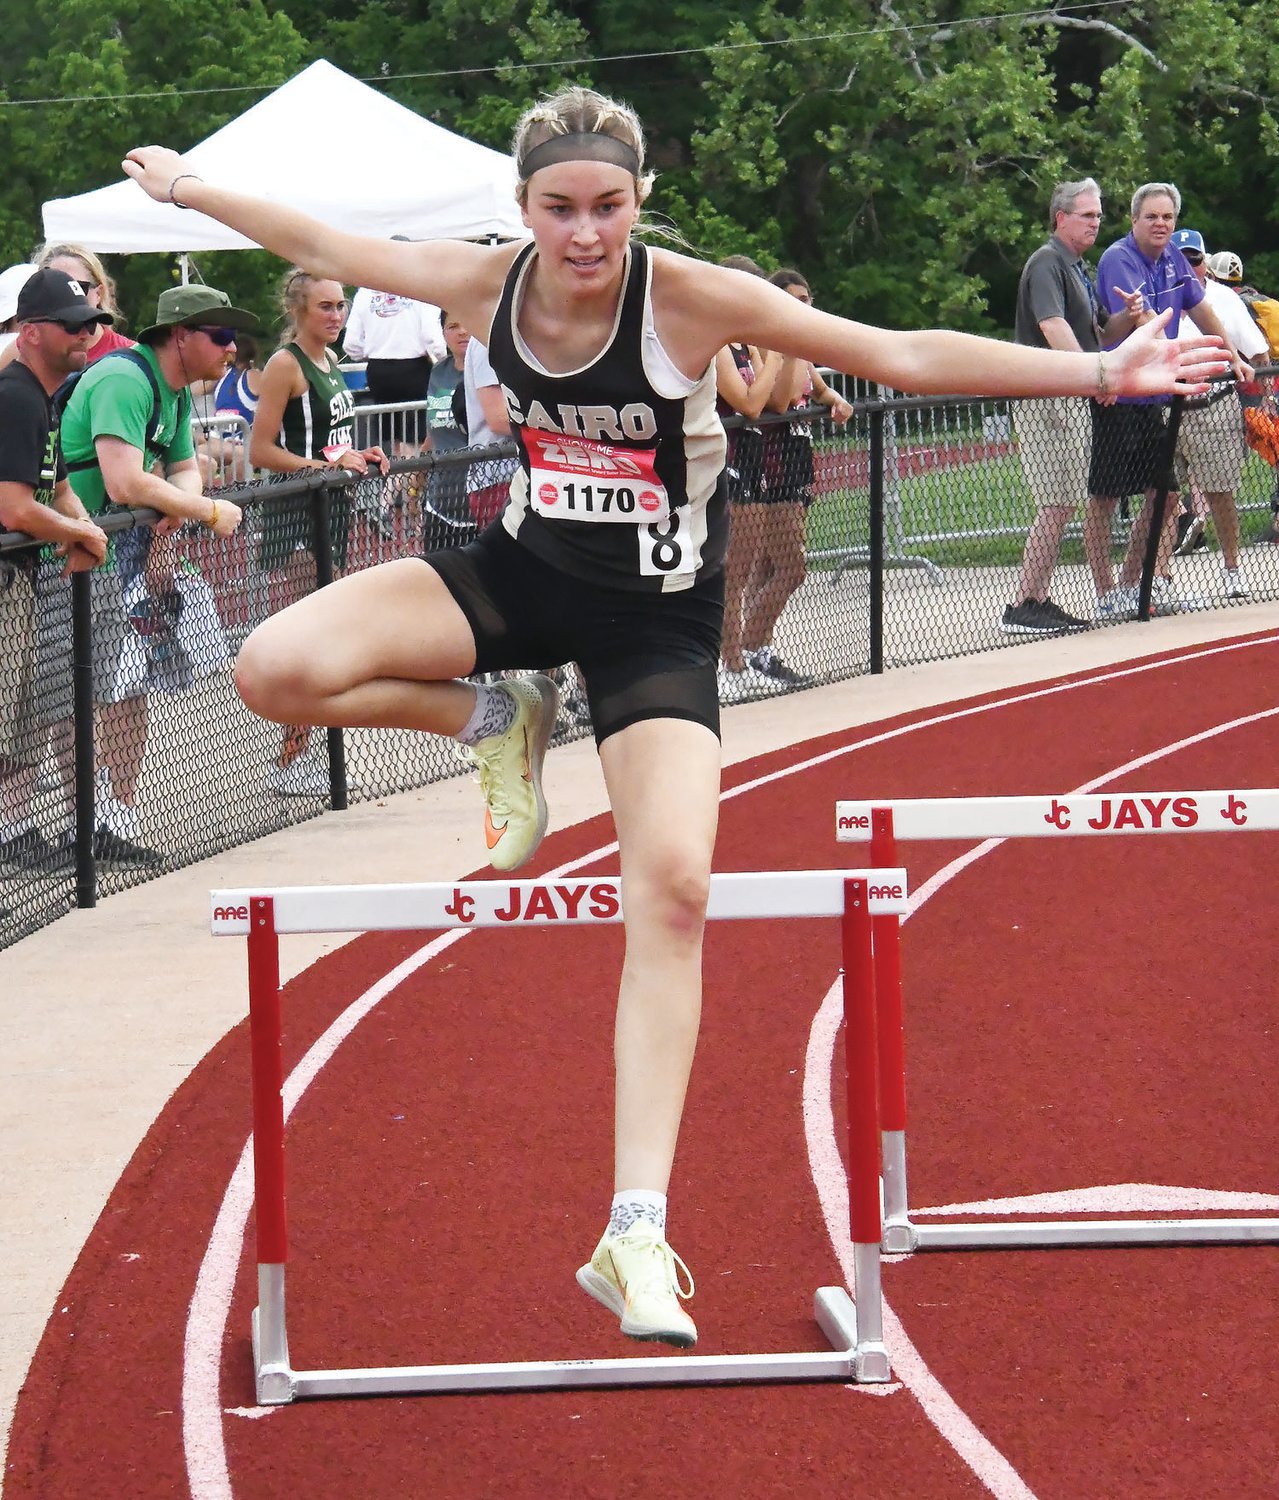 Cairo's Macie Harman clears the bar during the Class 1 girls' 300-meter hurdles on Friday at Adkins Stadium in Jefferson City.